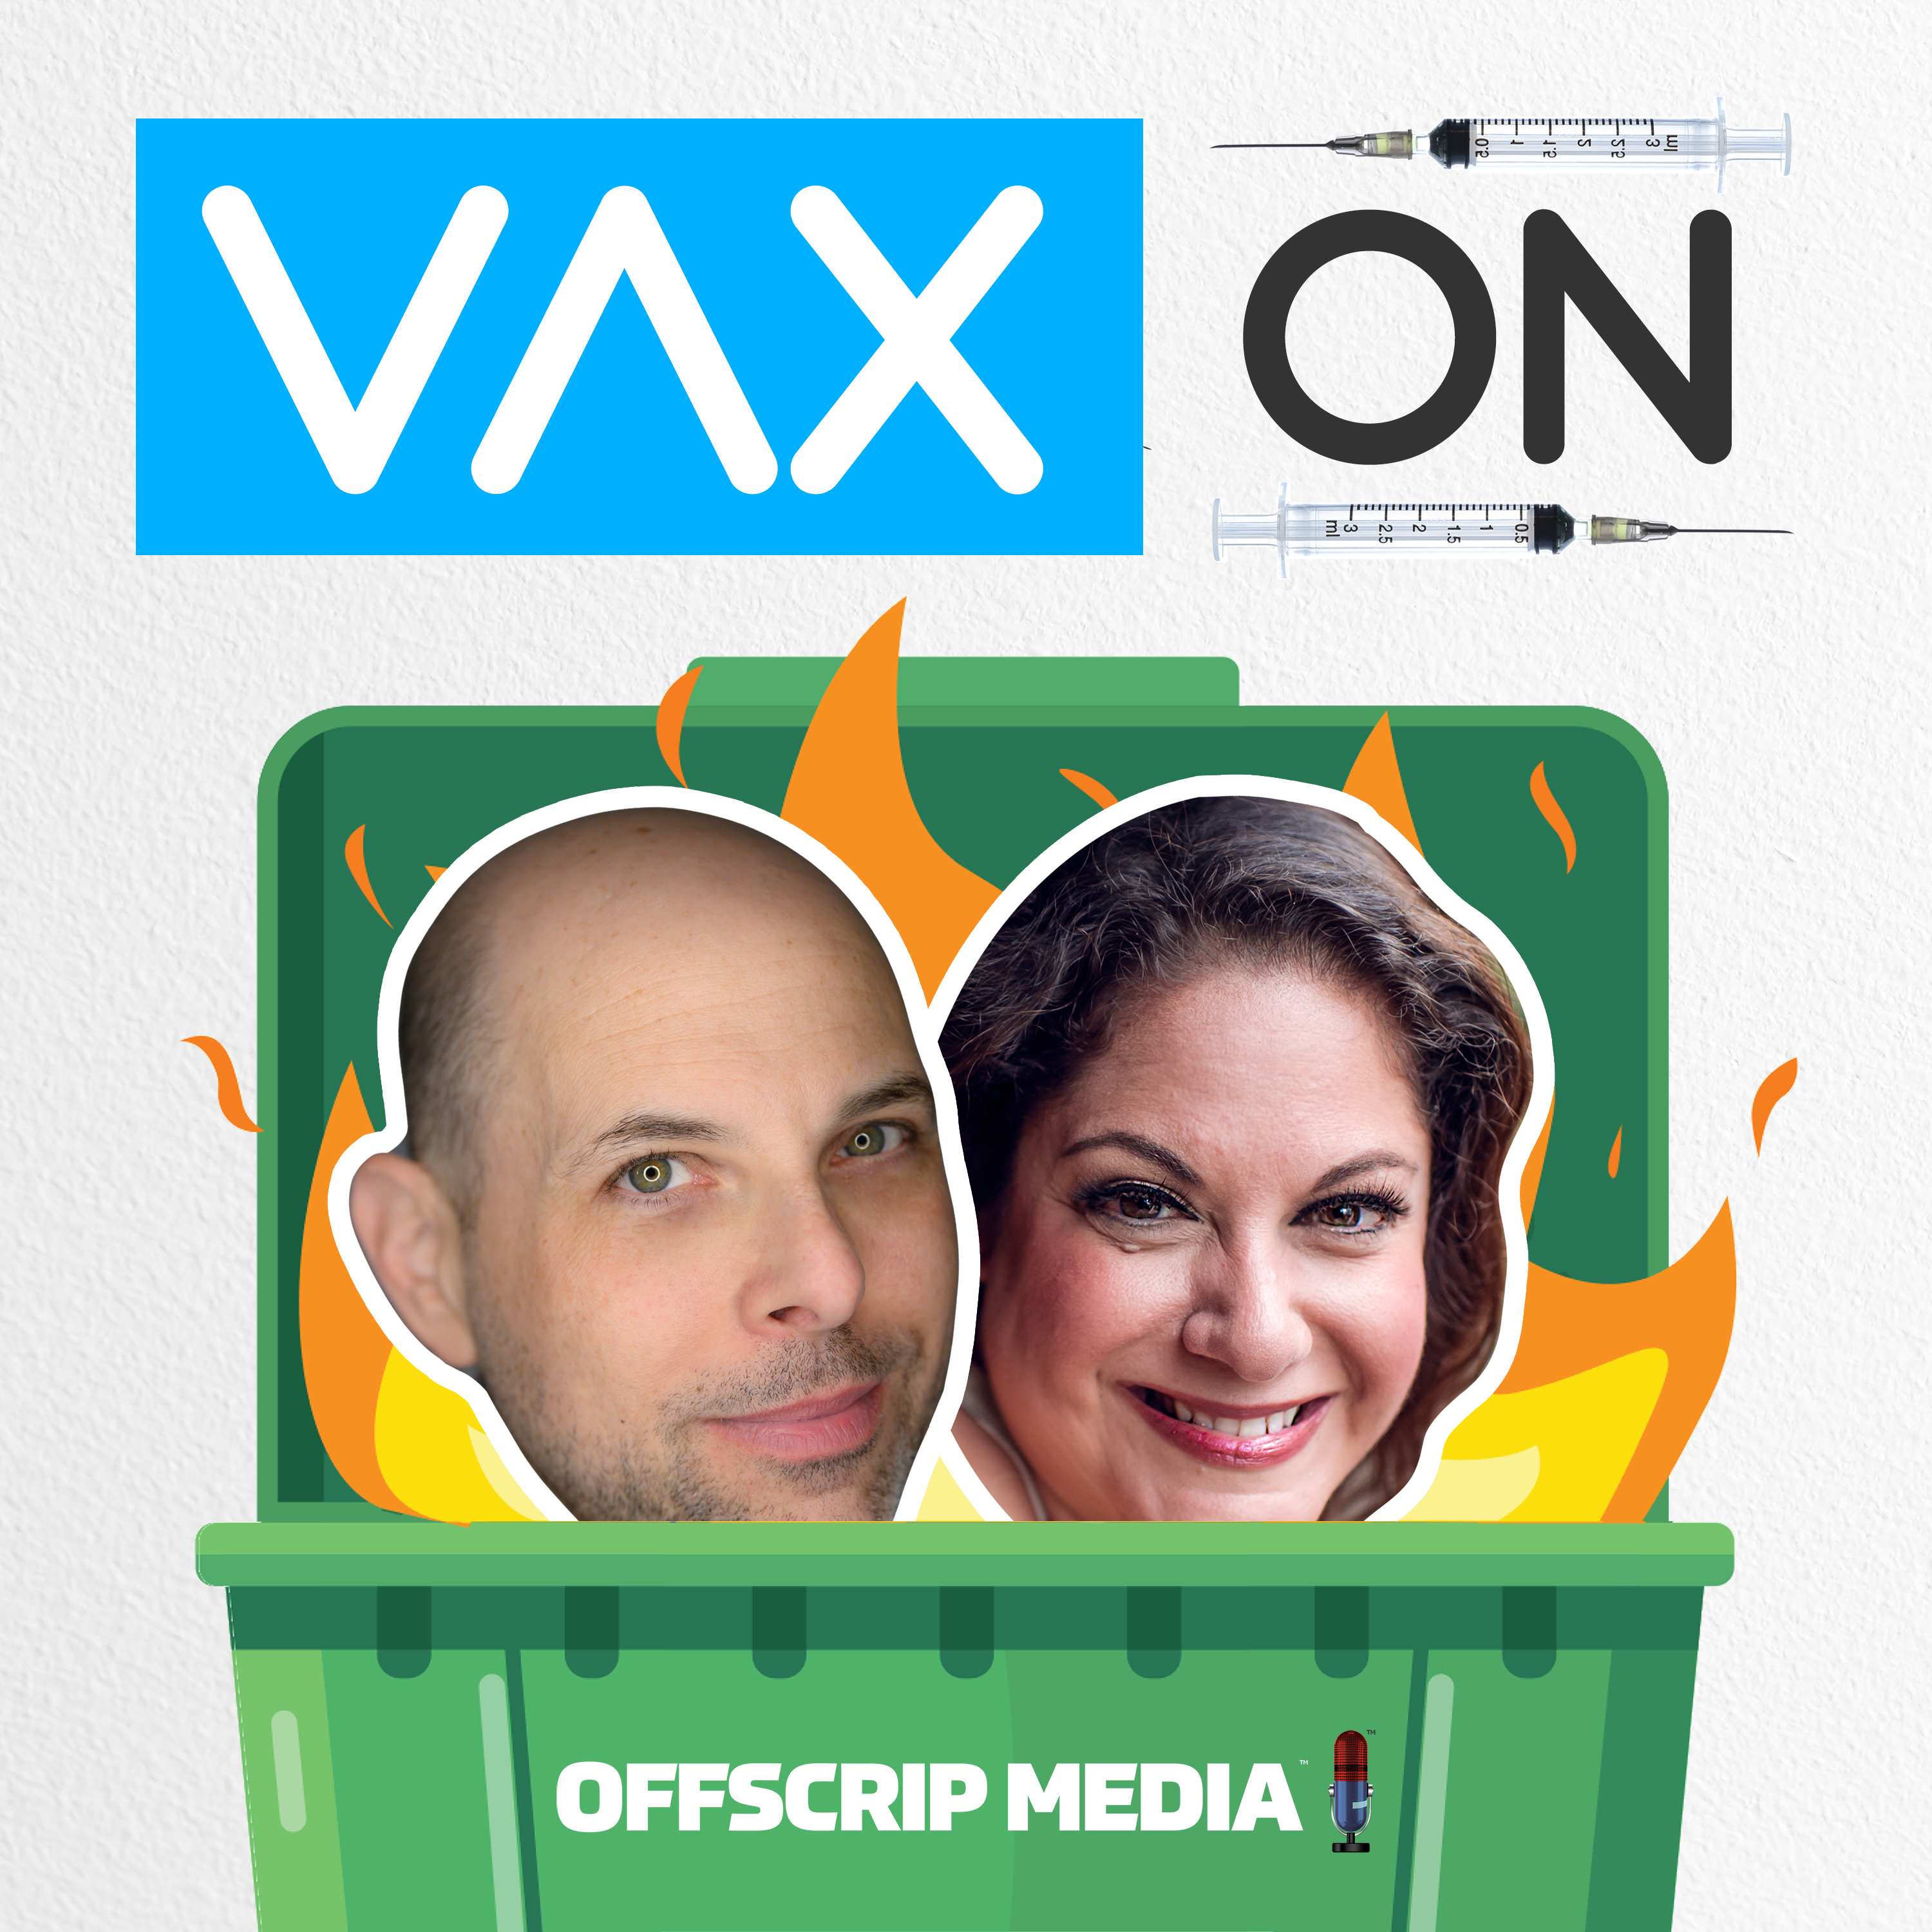 VAX ON: Wedding Crashers, Oh Canada, and COVID-spiricies